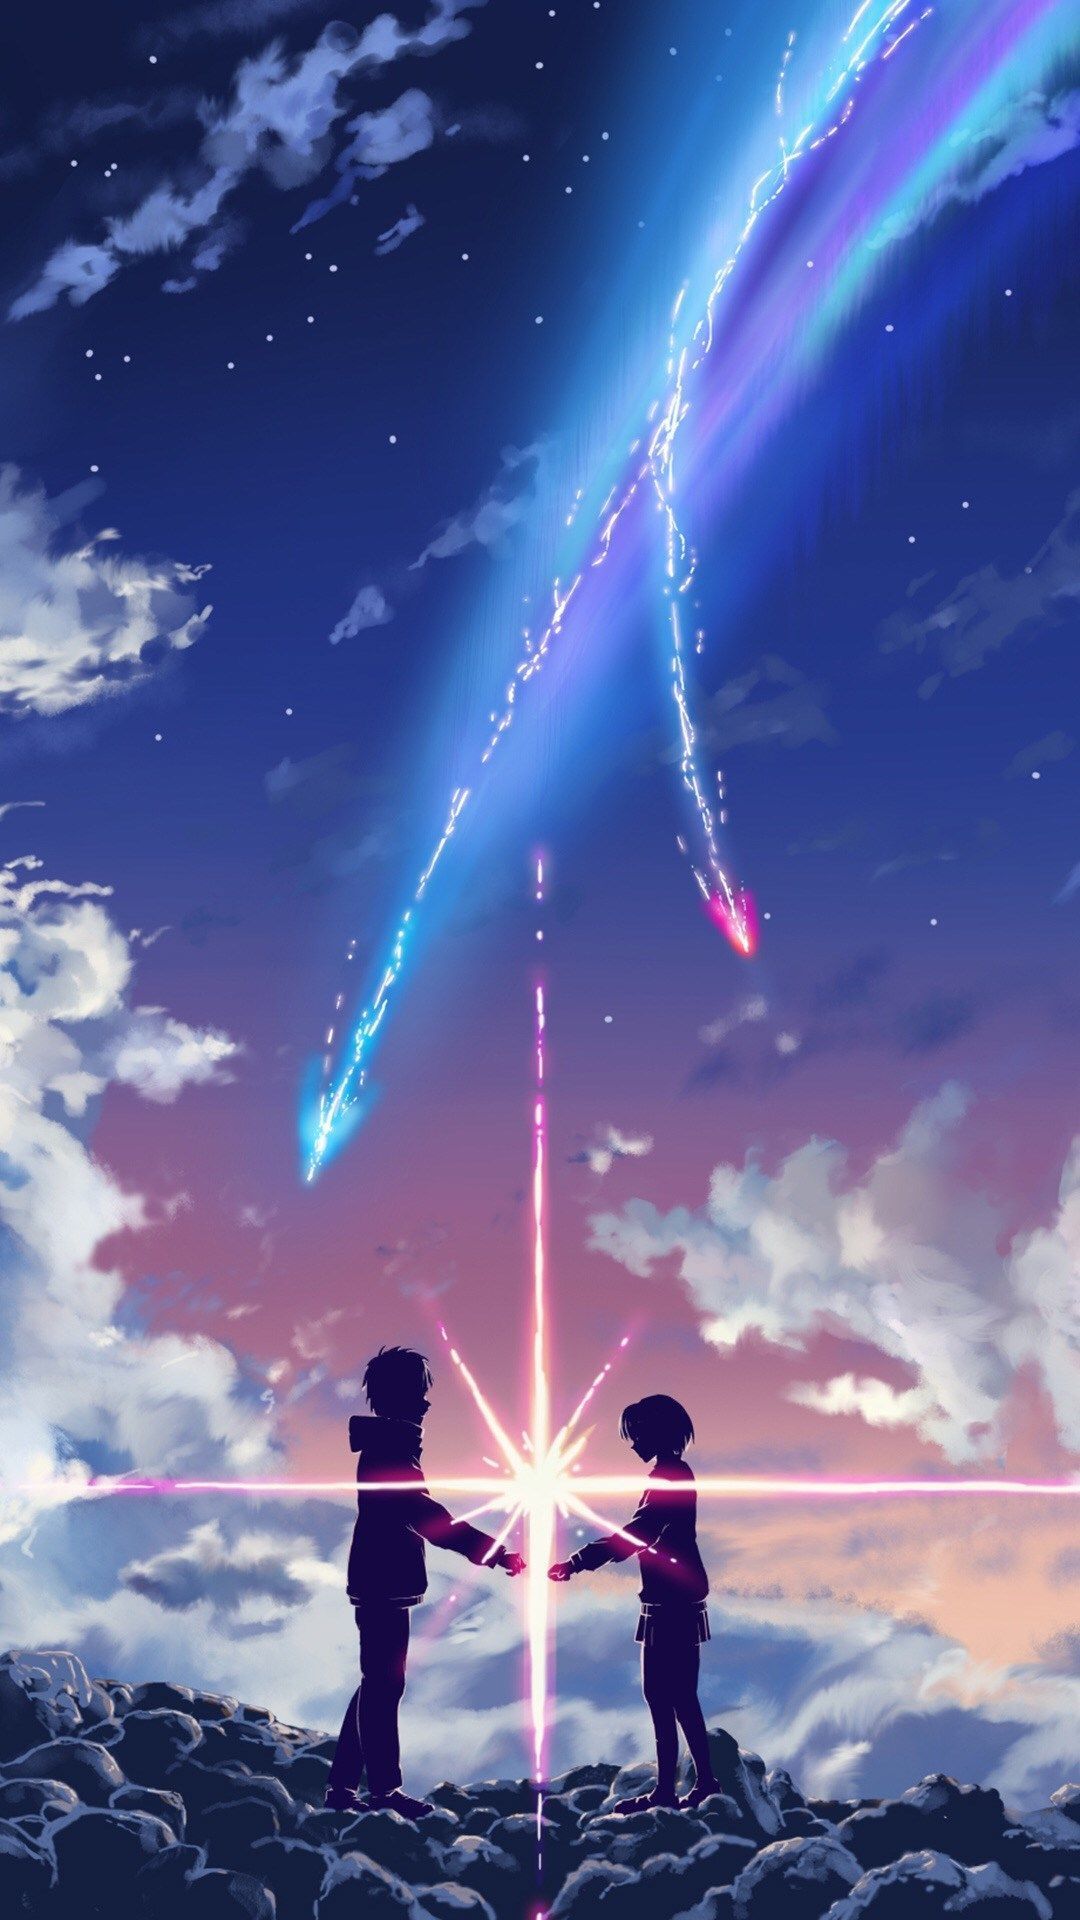 your name anime wallpapers in 2020